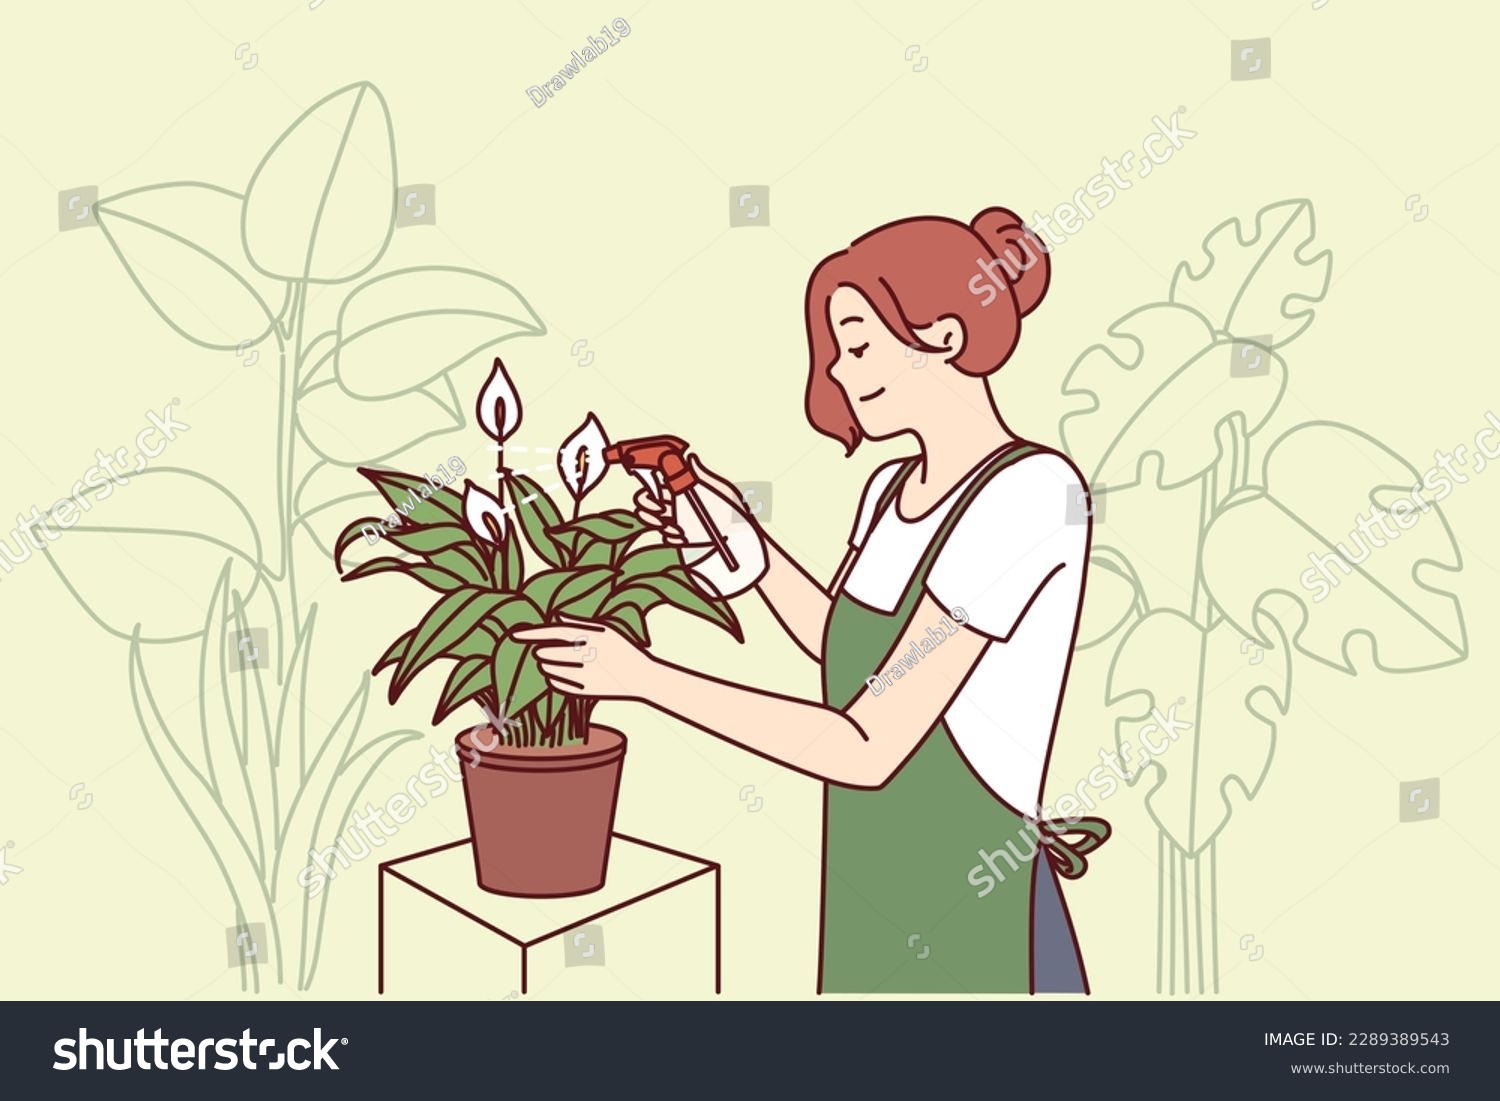 SVG of Woman gardener from greenhouse takes care of house plants by spraying leaves with fertilizer to get rid of termites. Florist girl works in greenhouse and breeds home plants for sale in own store svg